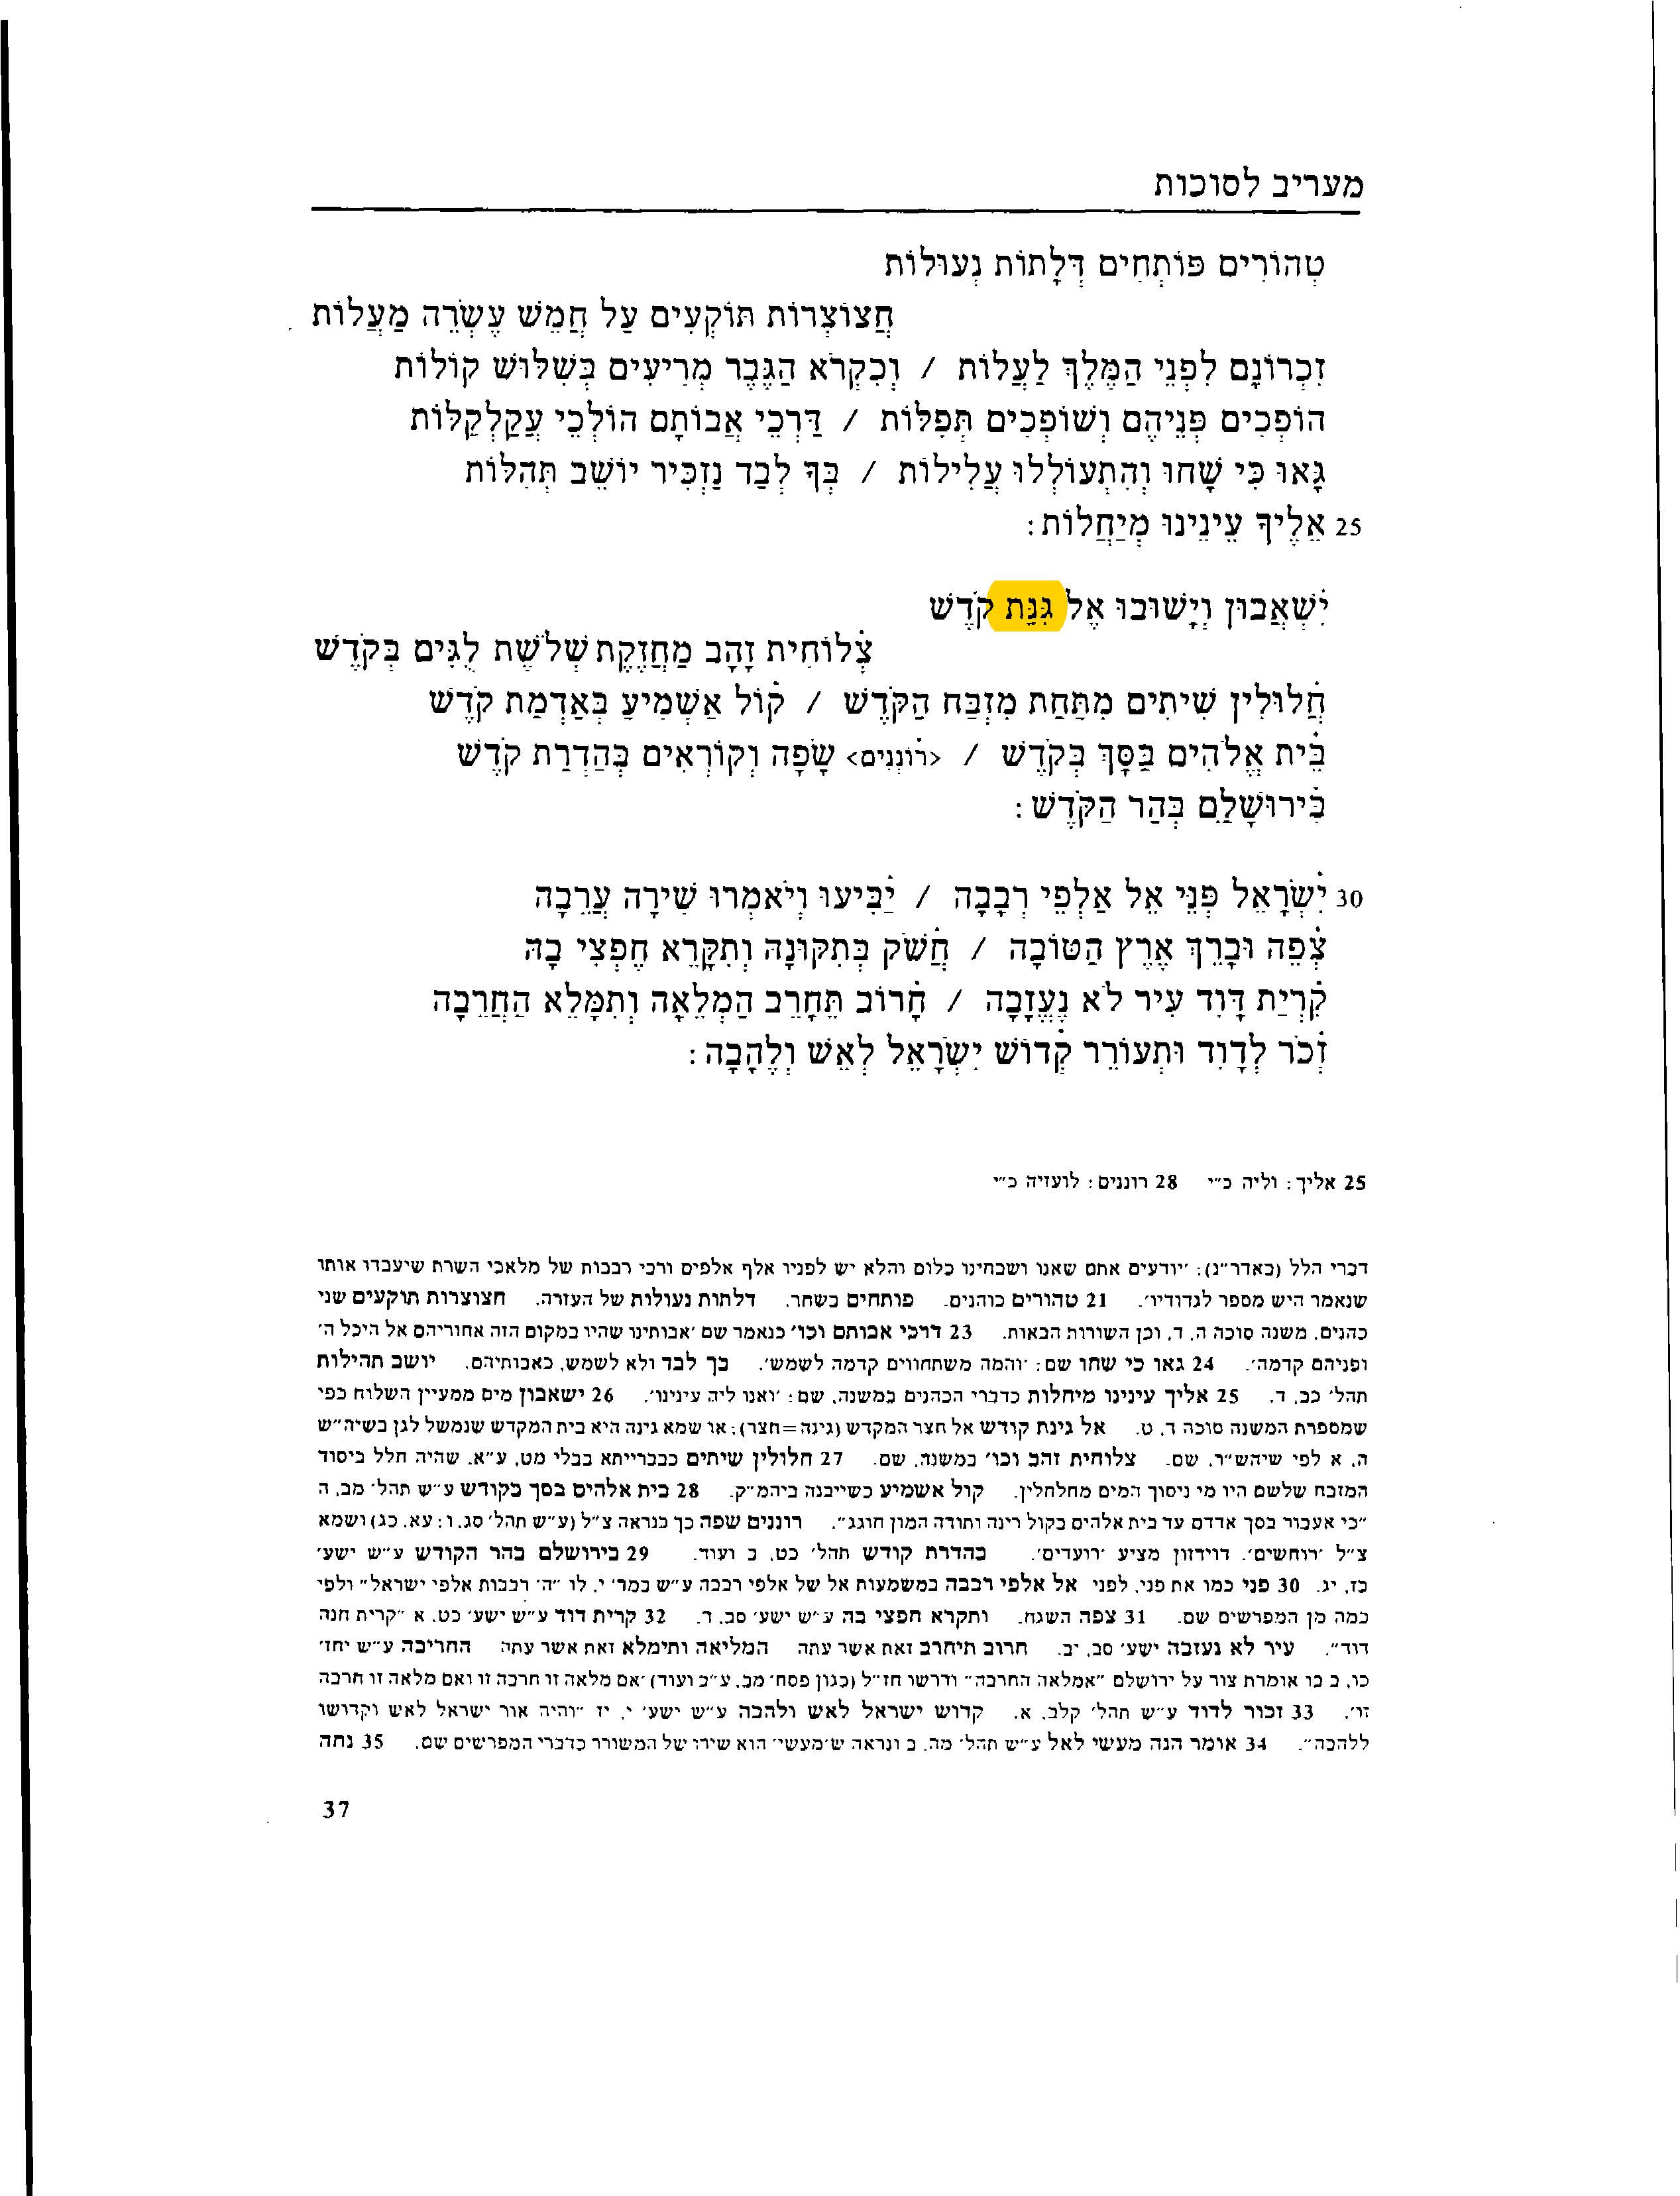 Pages from מחזור גולדשמיד ג.jpg